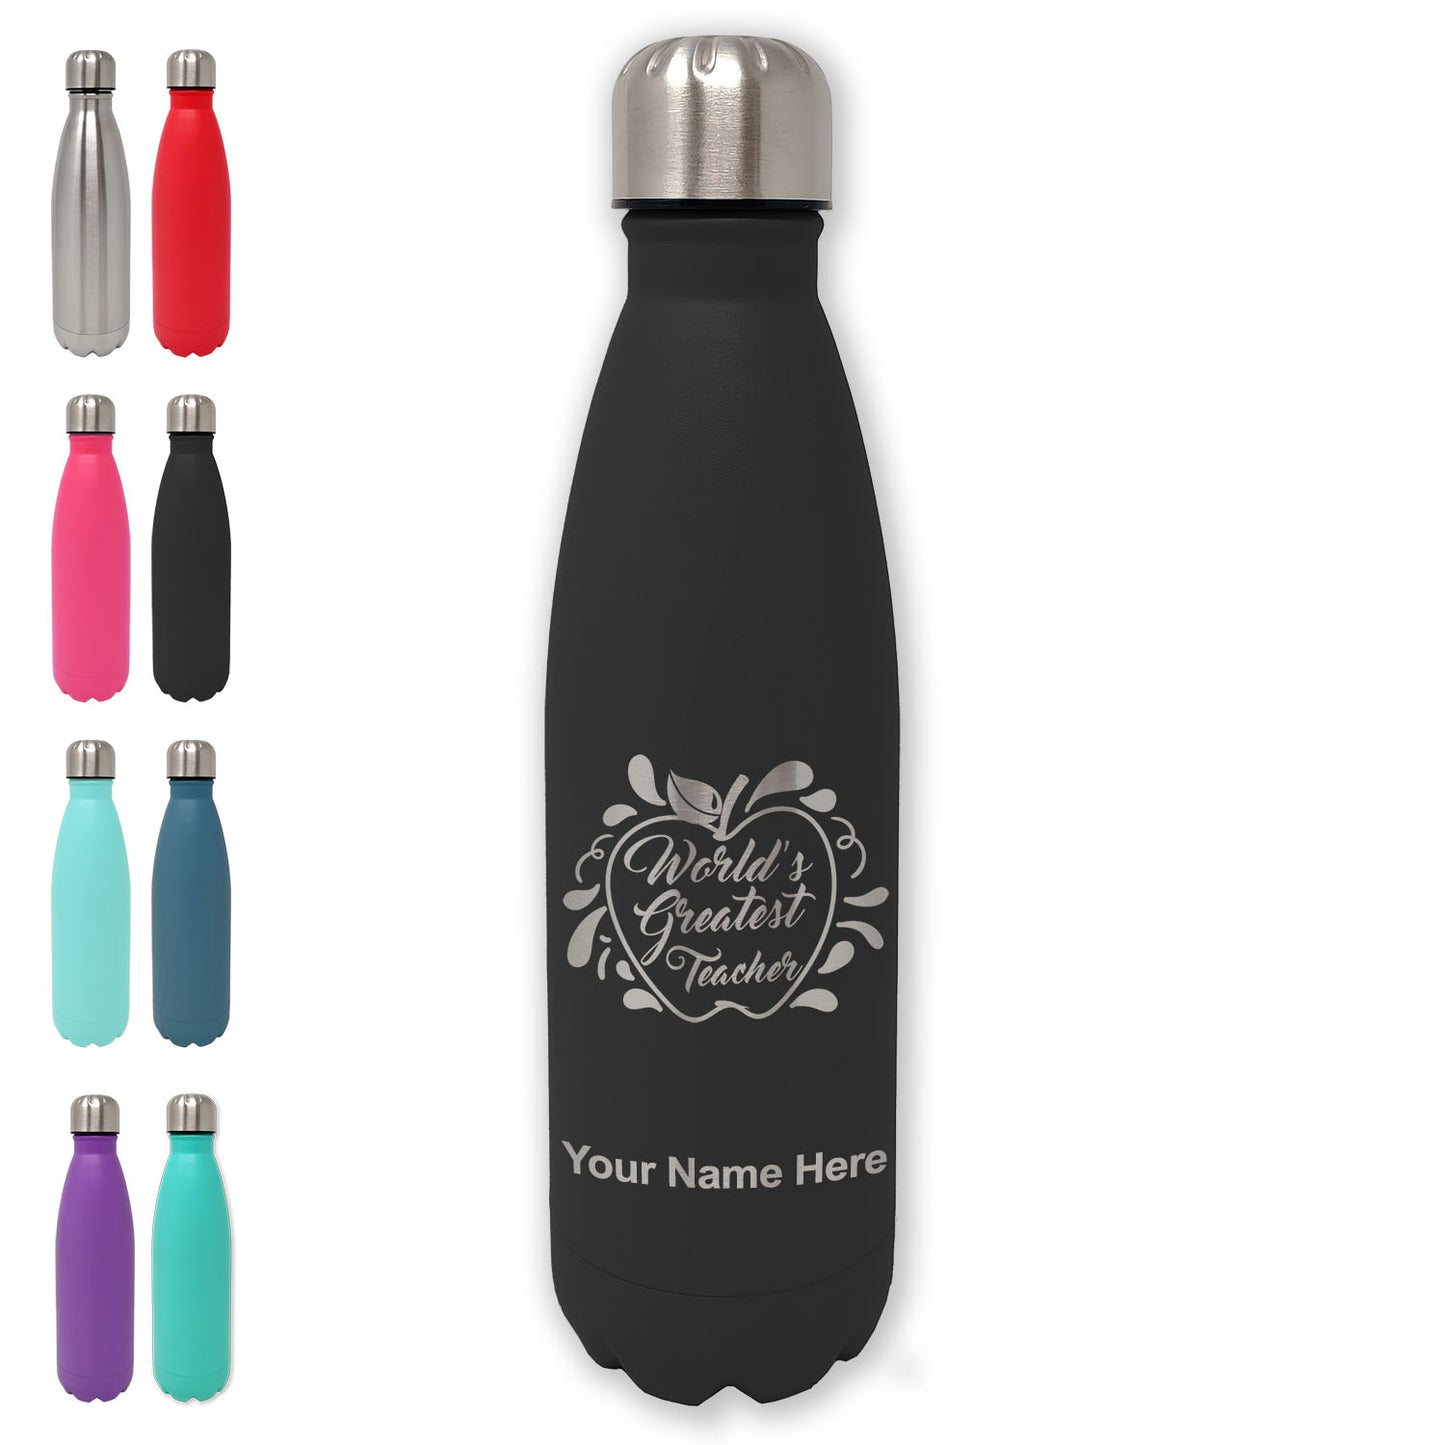 LaserGram Double Wall Water Bottle, World's Greatest Teacher, Personalized Engraving Included